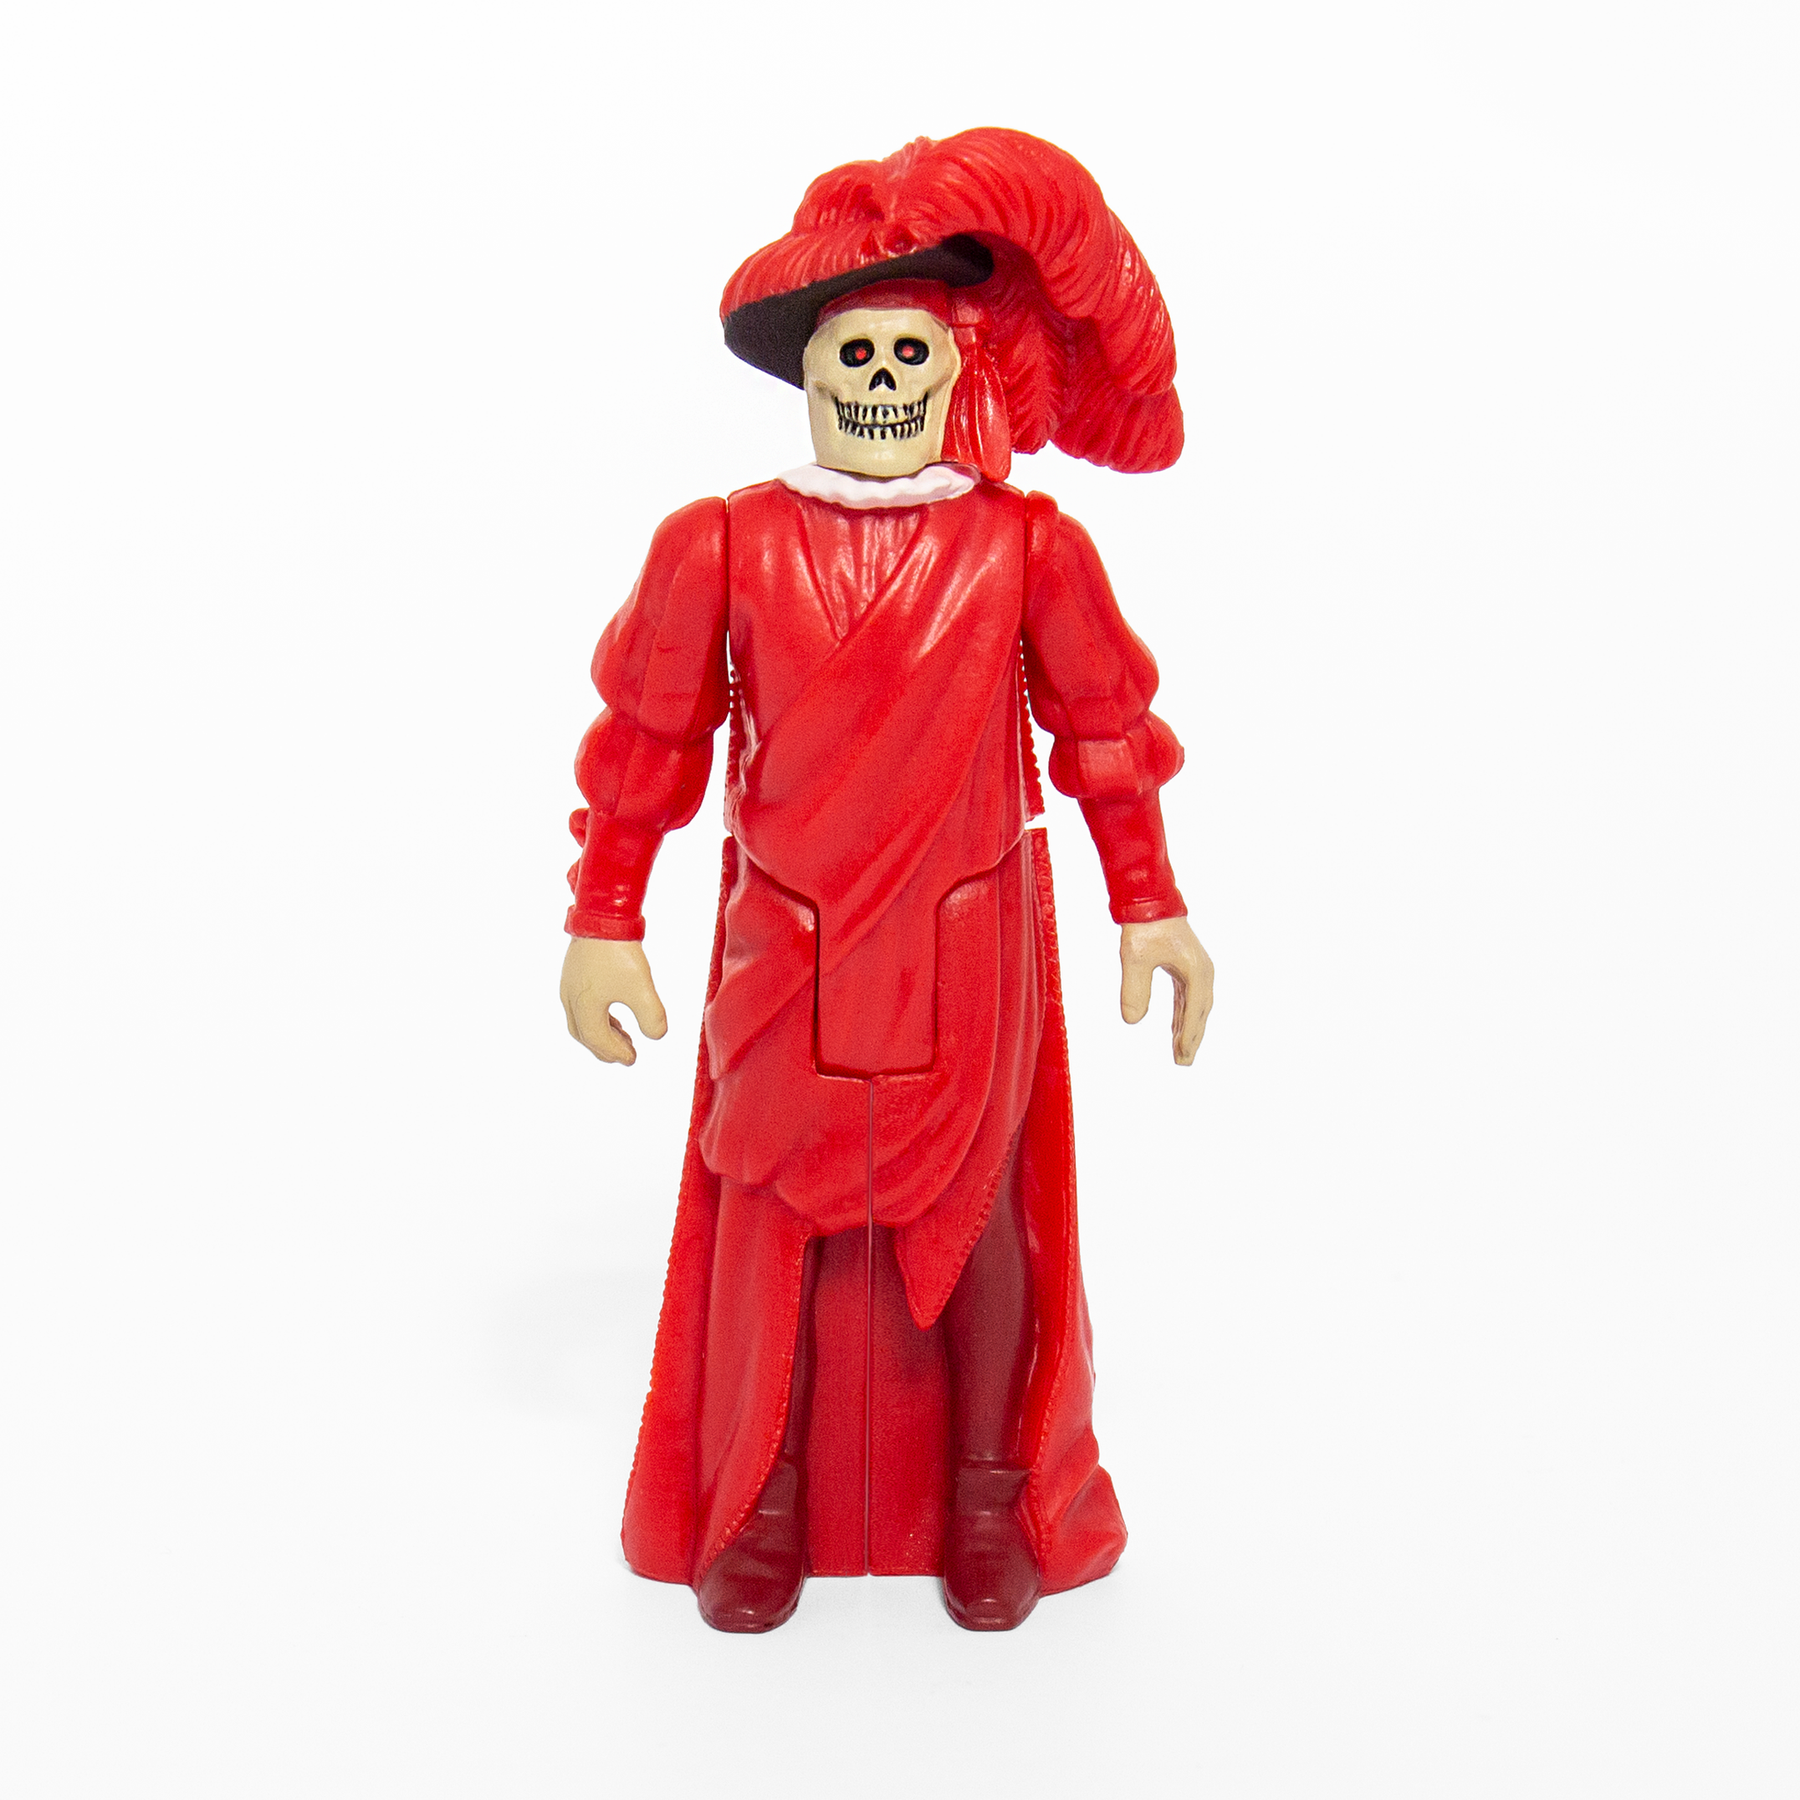 Universal Monsters ReAction Figure - The Masque of the Red Death - Zlc Collectibles